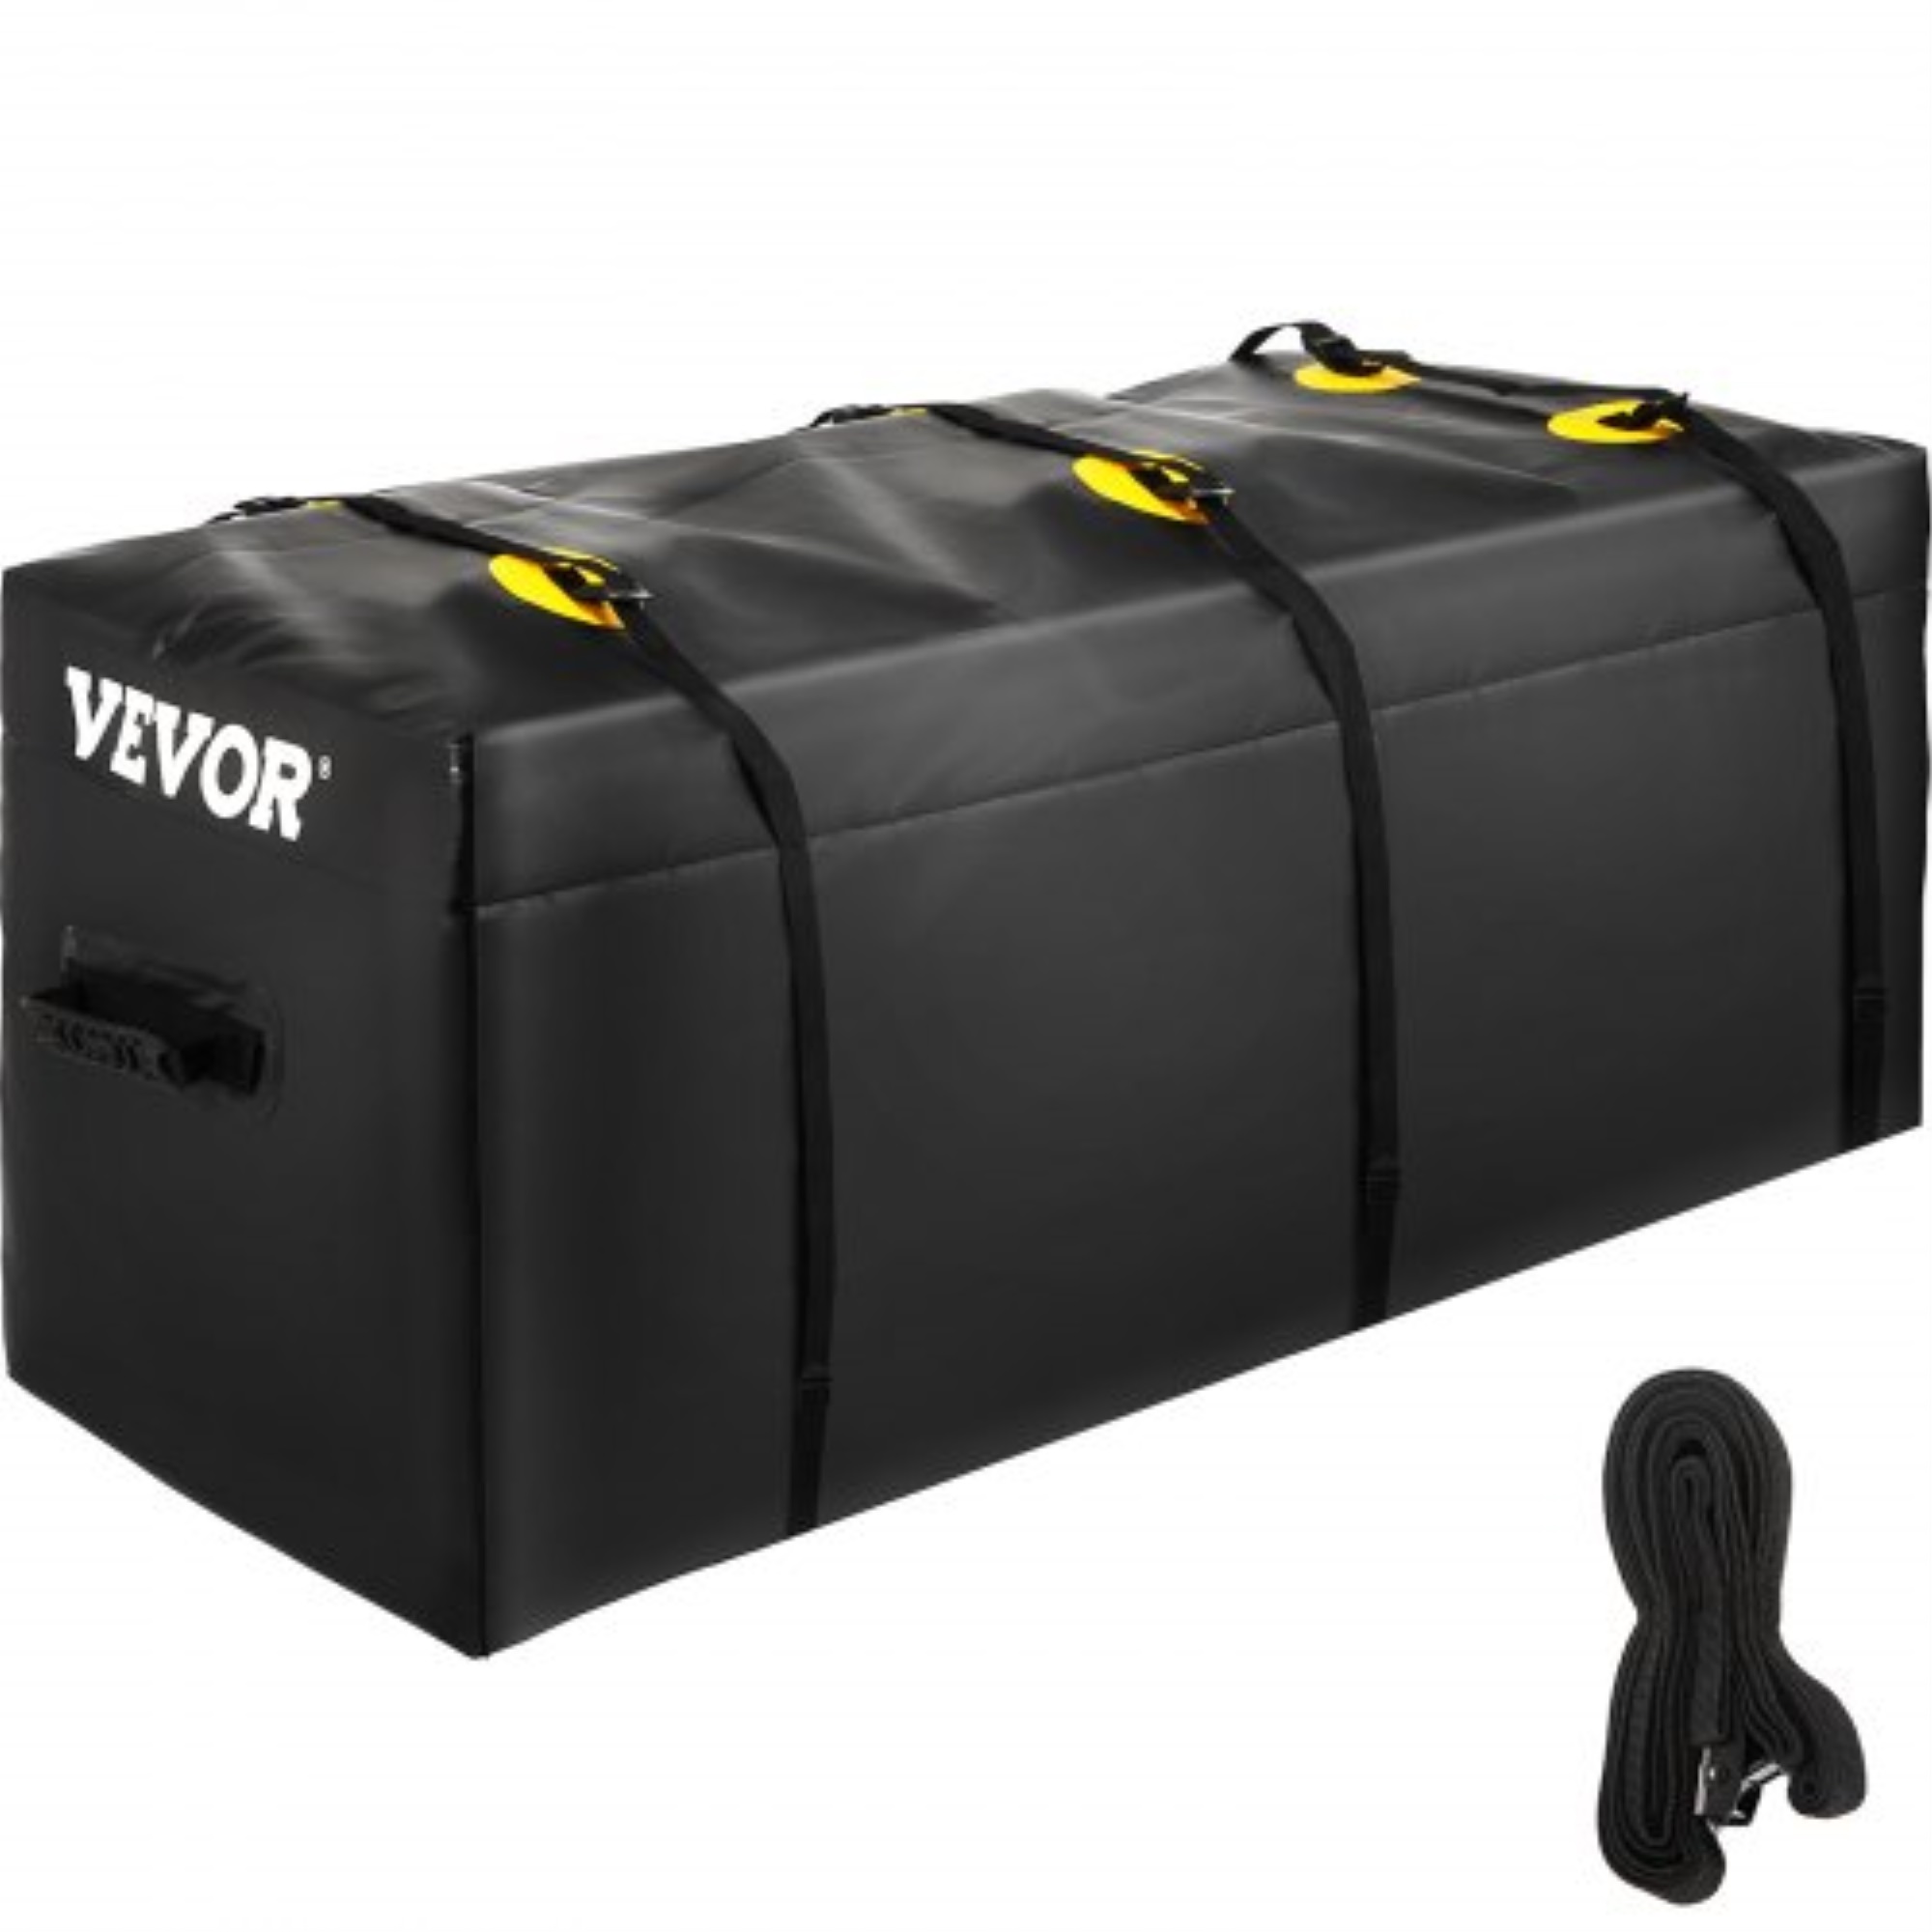 VEVOR Hitch Cargo Carrier Bag, Waterproof 840D PVC, 48"x20"x22" (12 Cubic Feet), Heavy Duty Cargo Bag for Hitch Carrier with R